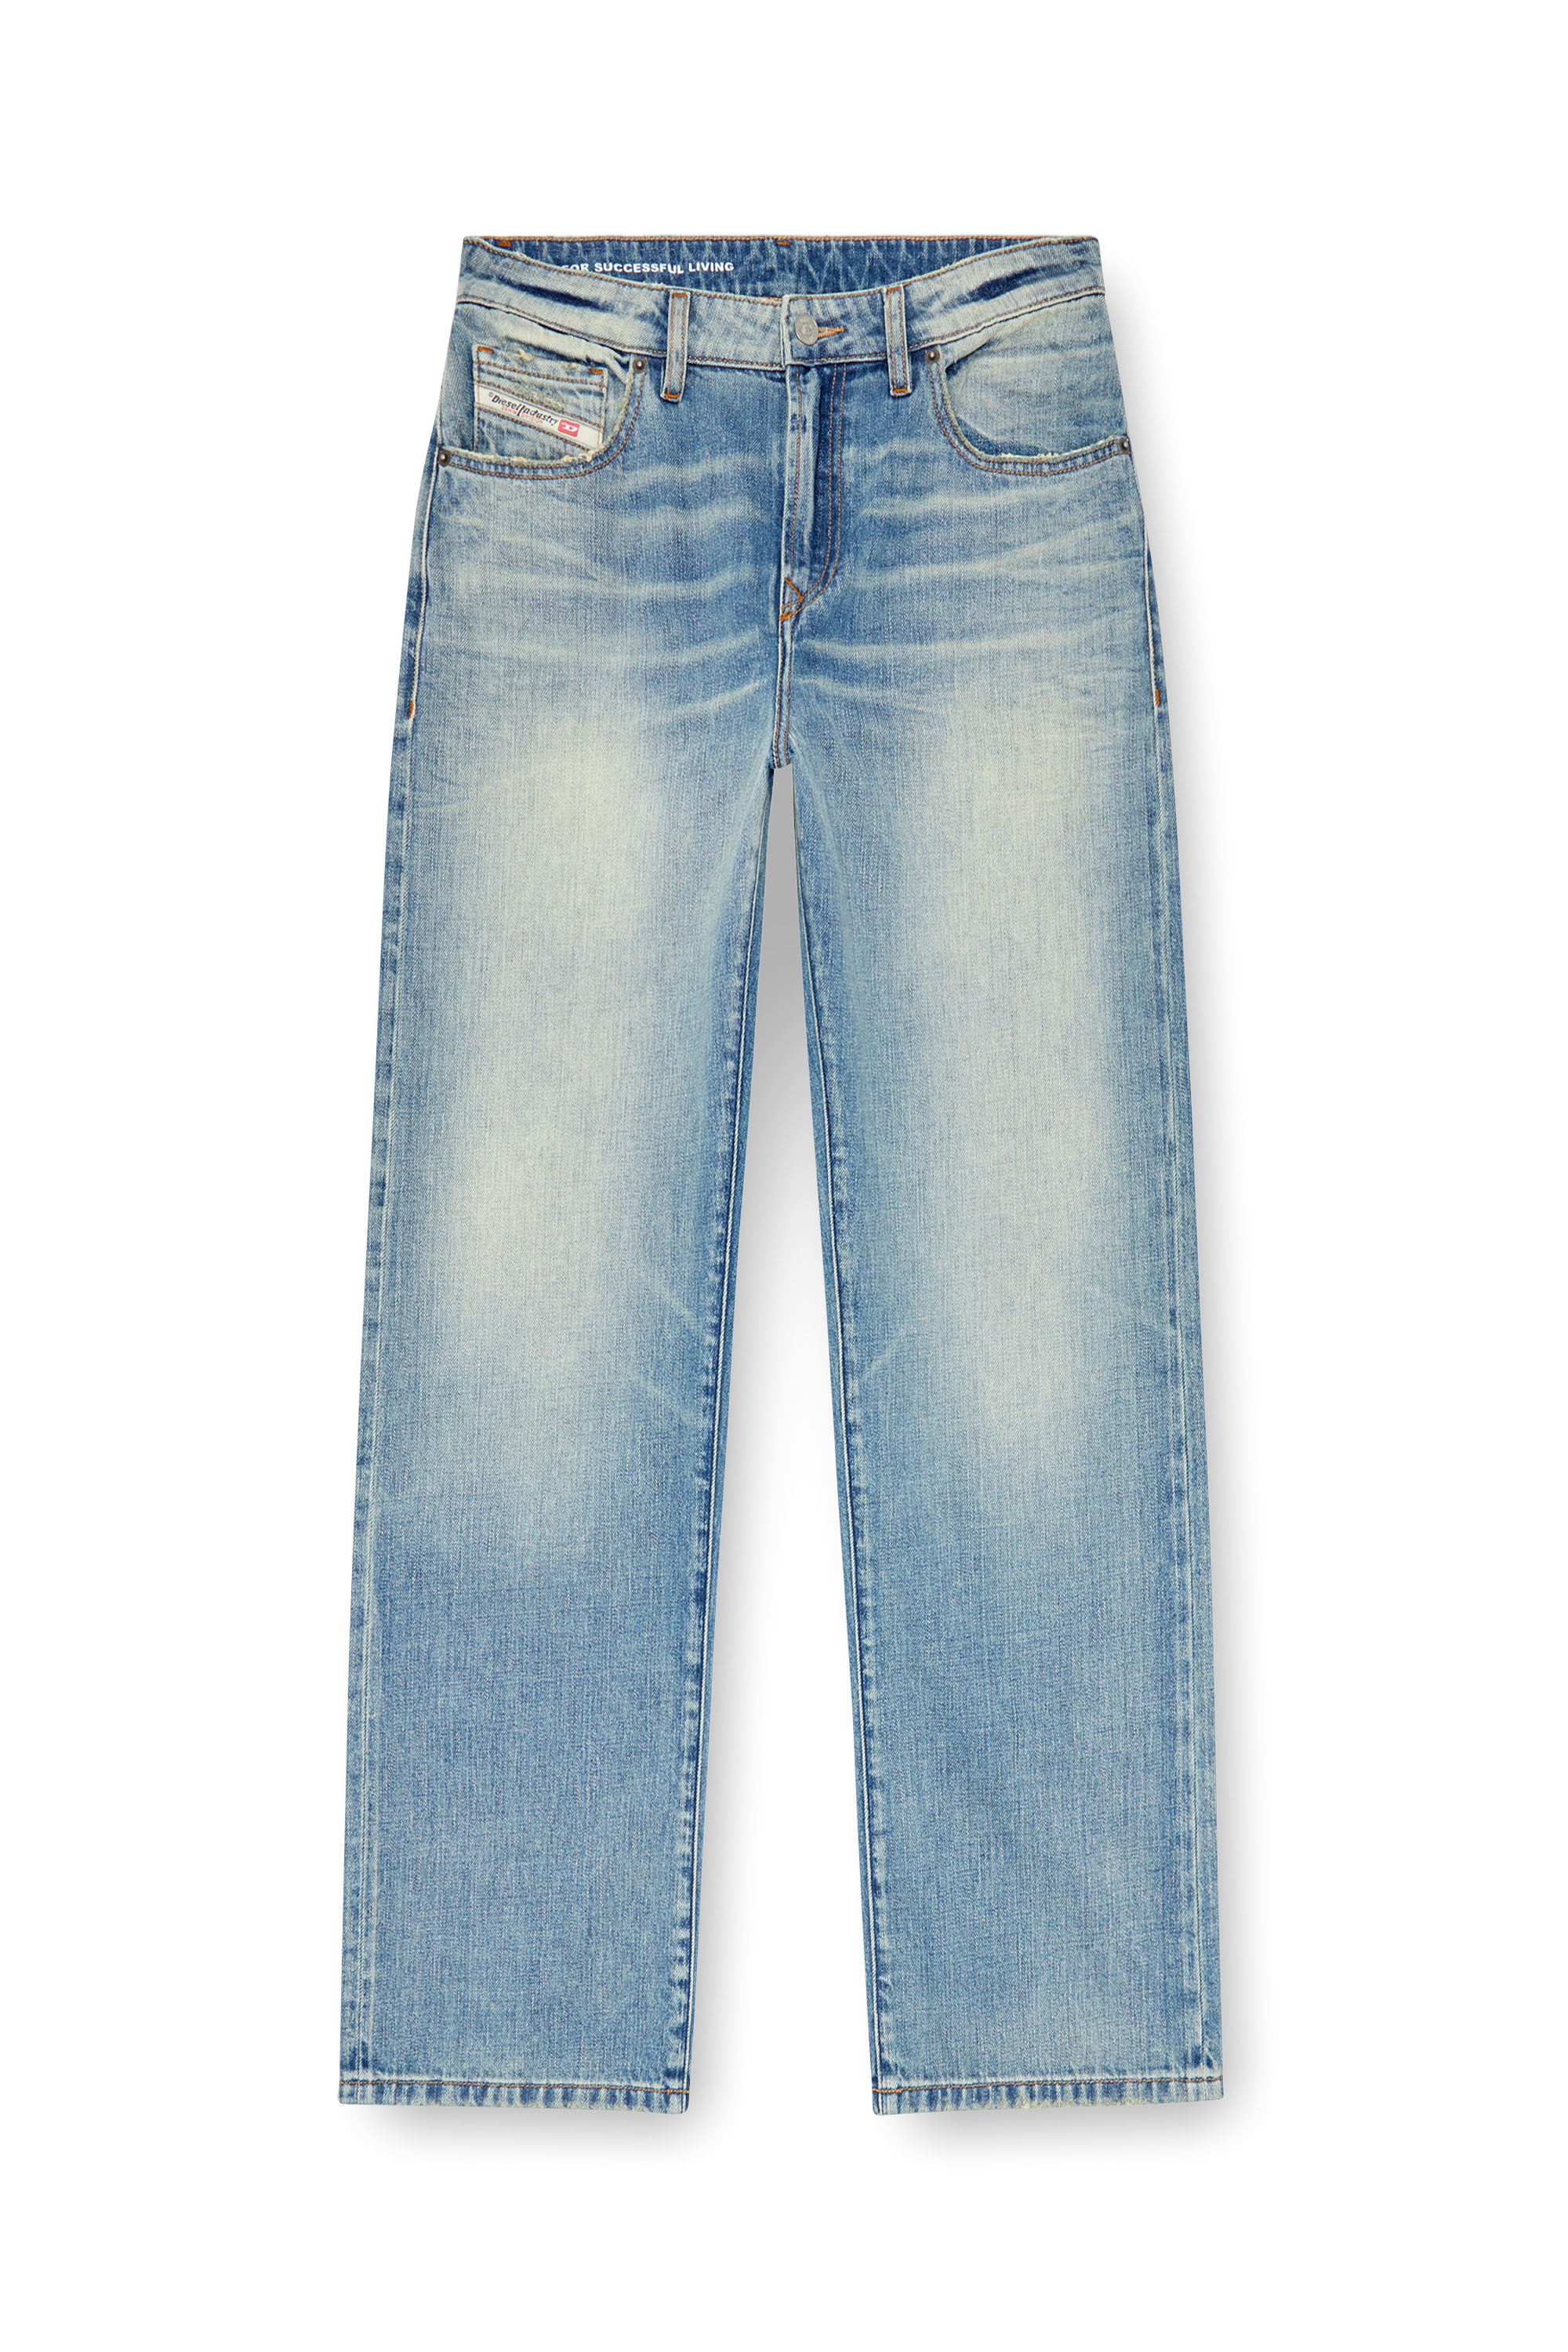 Diesel - Straight Jeans 1999 D-Reggy 0GRDN, Mujer Straight Jeans - 1999 D-Reggy in Azul marino - Image 5